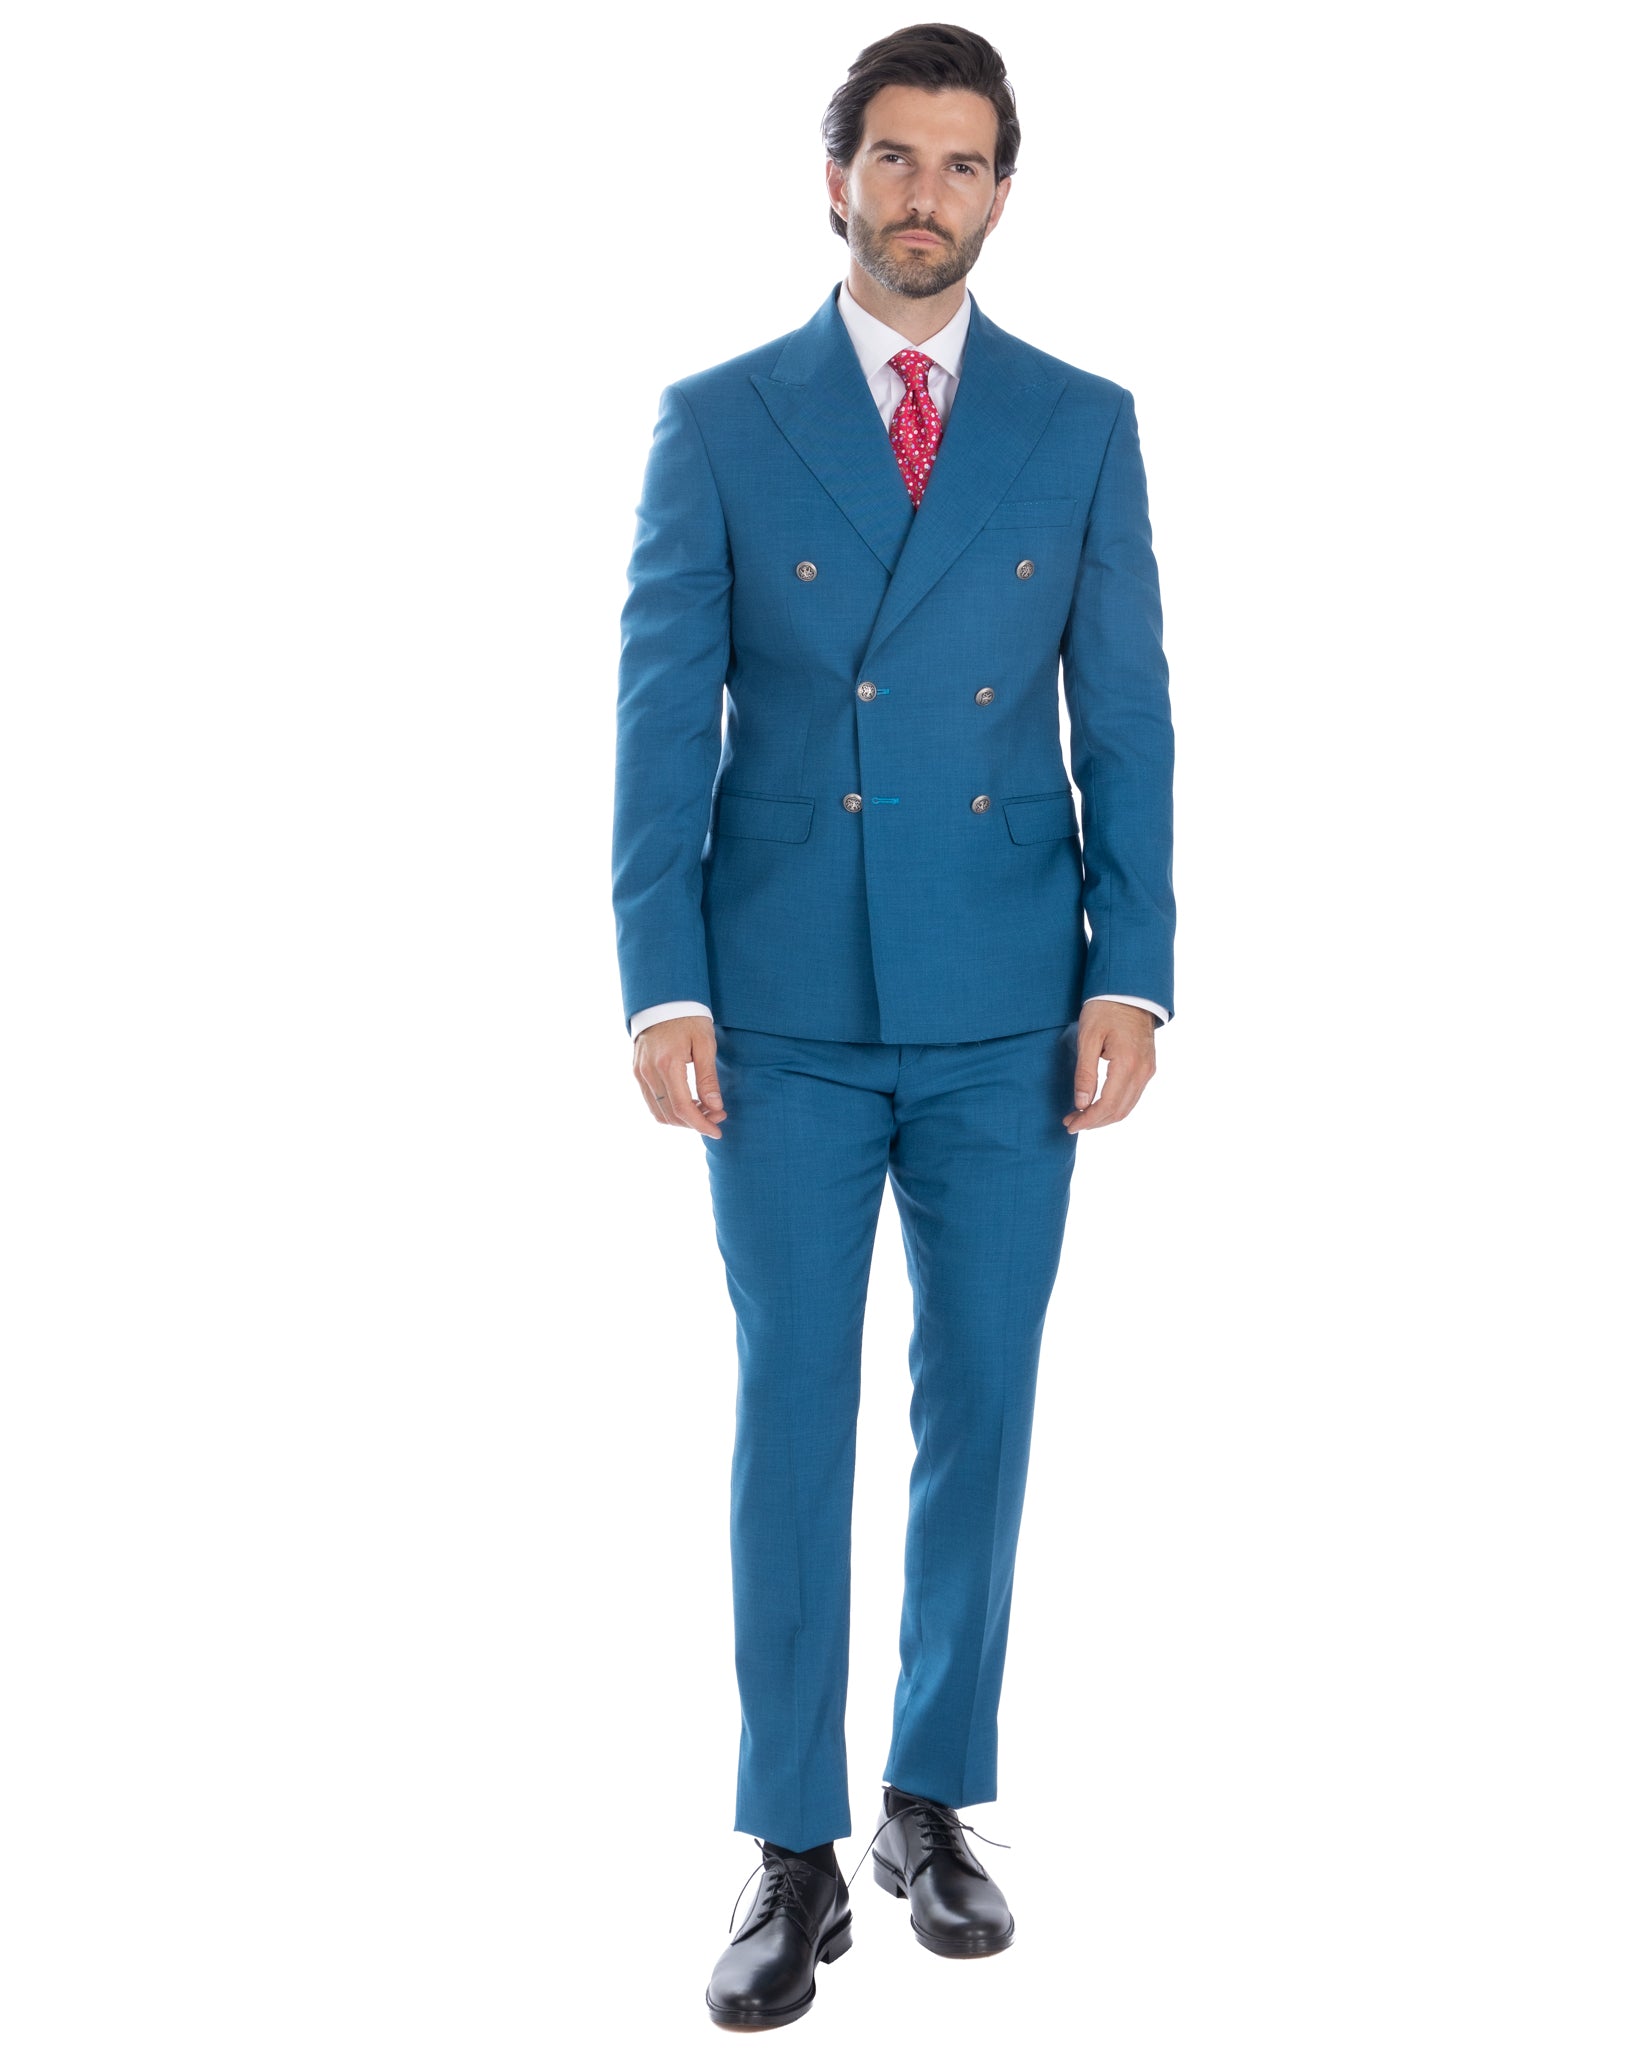 Thun - teal melange double-breasted suit